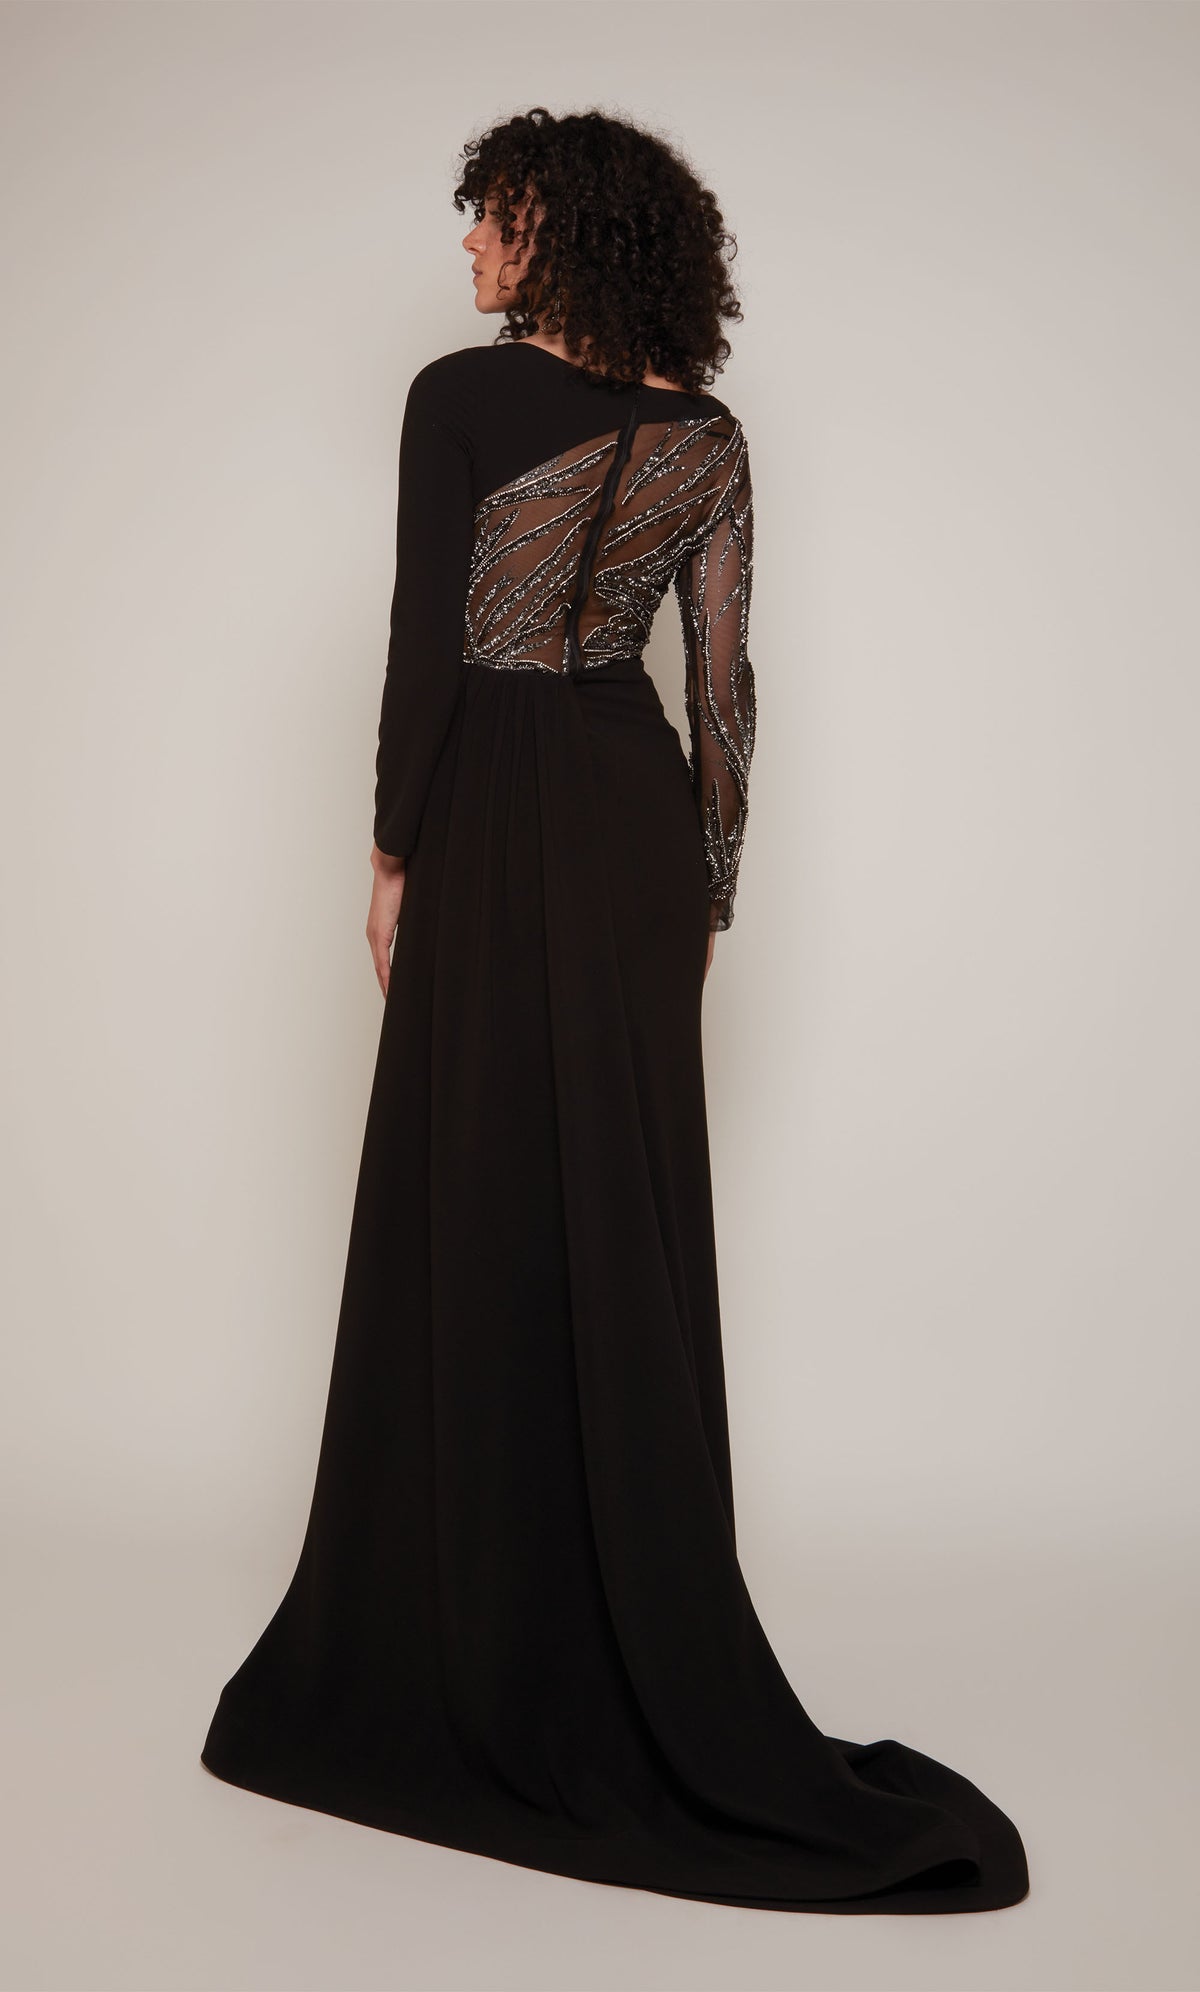 A long sleeve evening gown with a sheer, embellished bodice and sleeve and a slight train in classic black with silver accents.